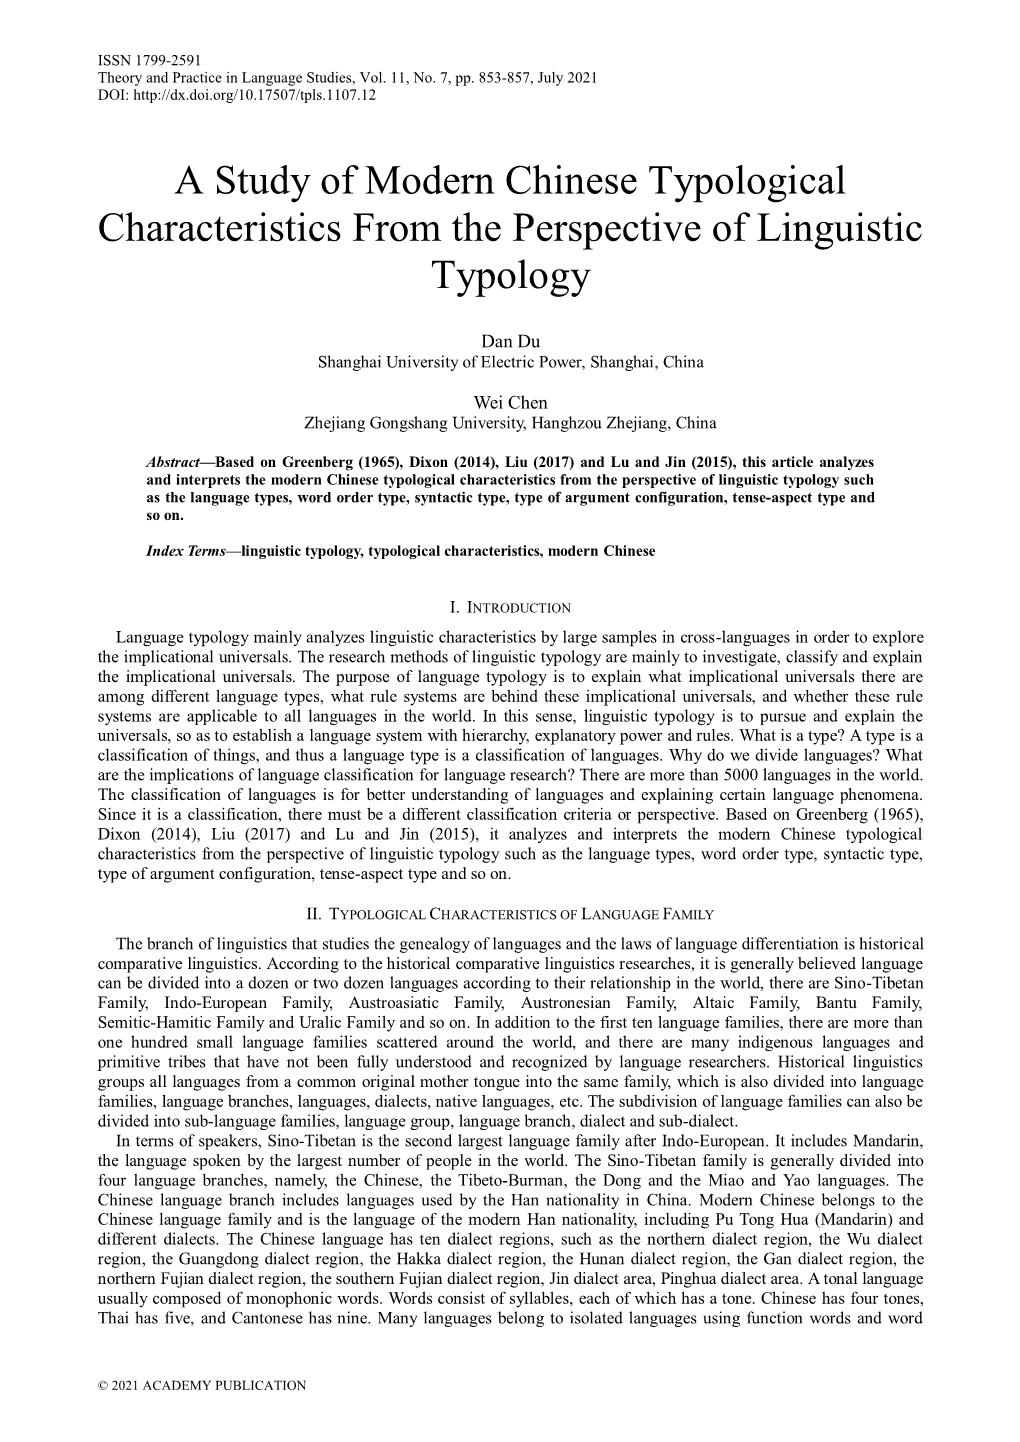 A Study of Modern Chinese Typological Characteristics from the Perspective of Linguistic Typology